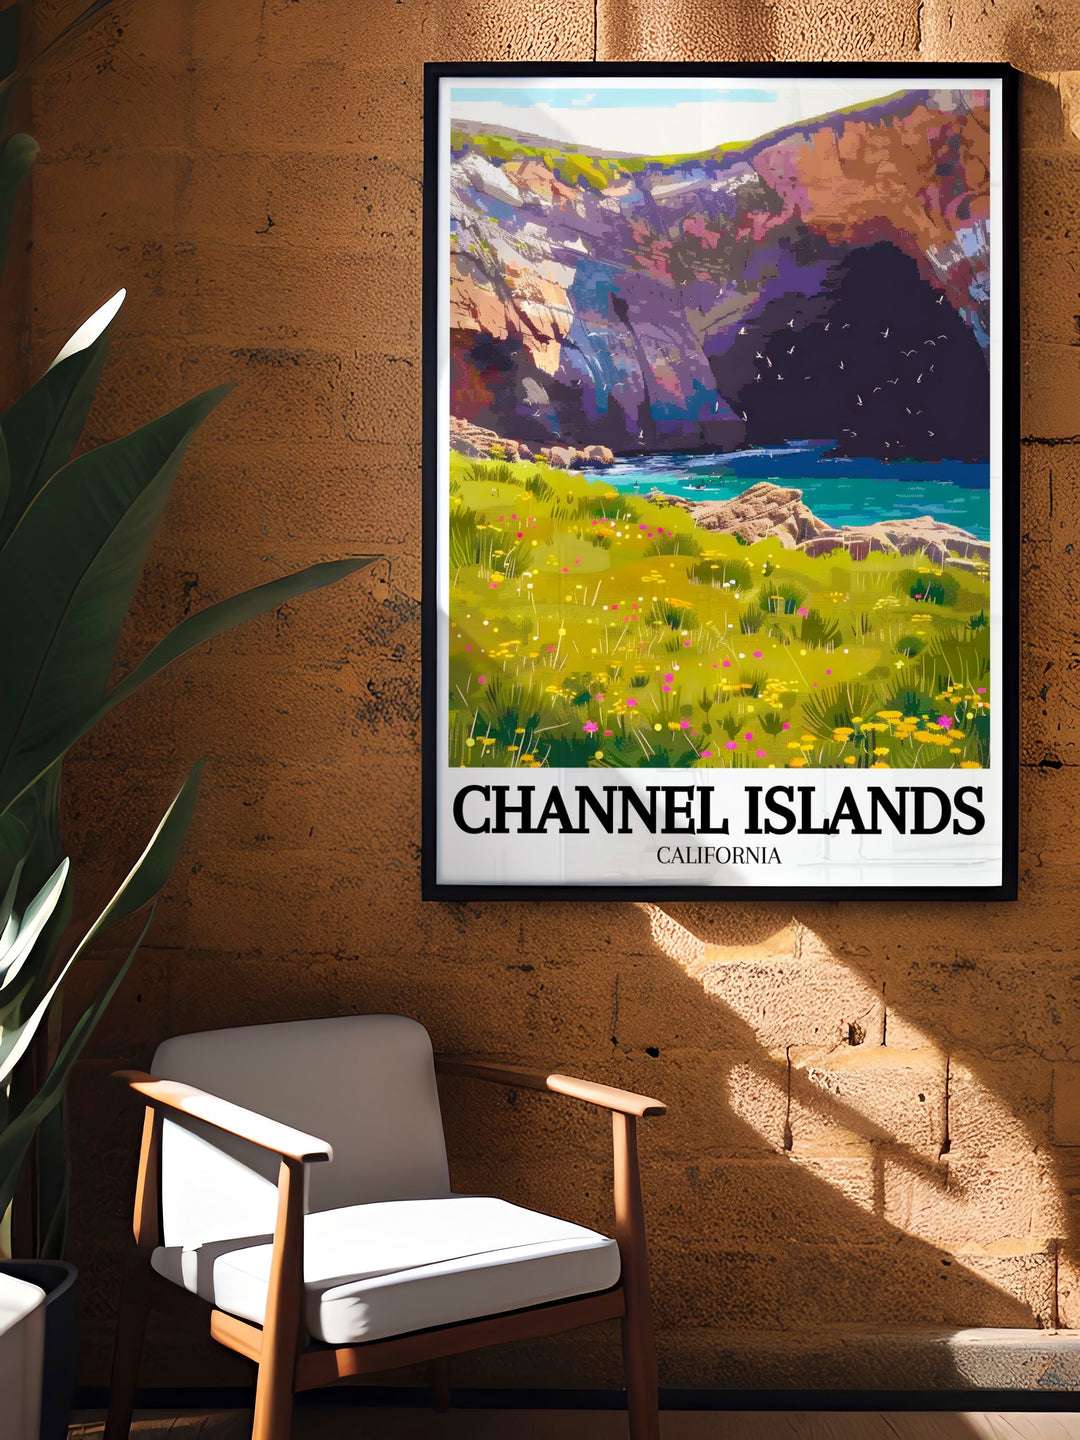 Stunning Santa Rosa Island, Torrey Pines groves artwork highlighting the natural beauty and rare Torrey Pines trees found only in a few places on earth ideal for travel lovers and retro wall art collectors.